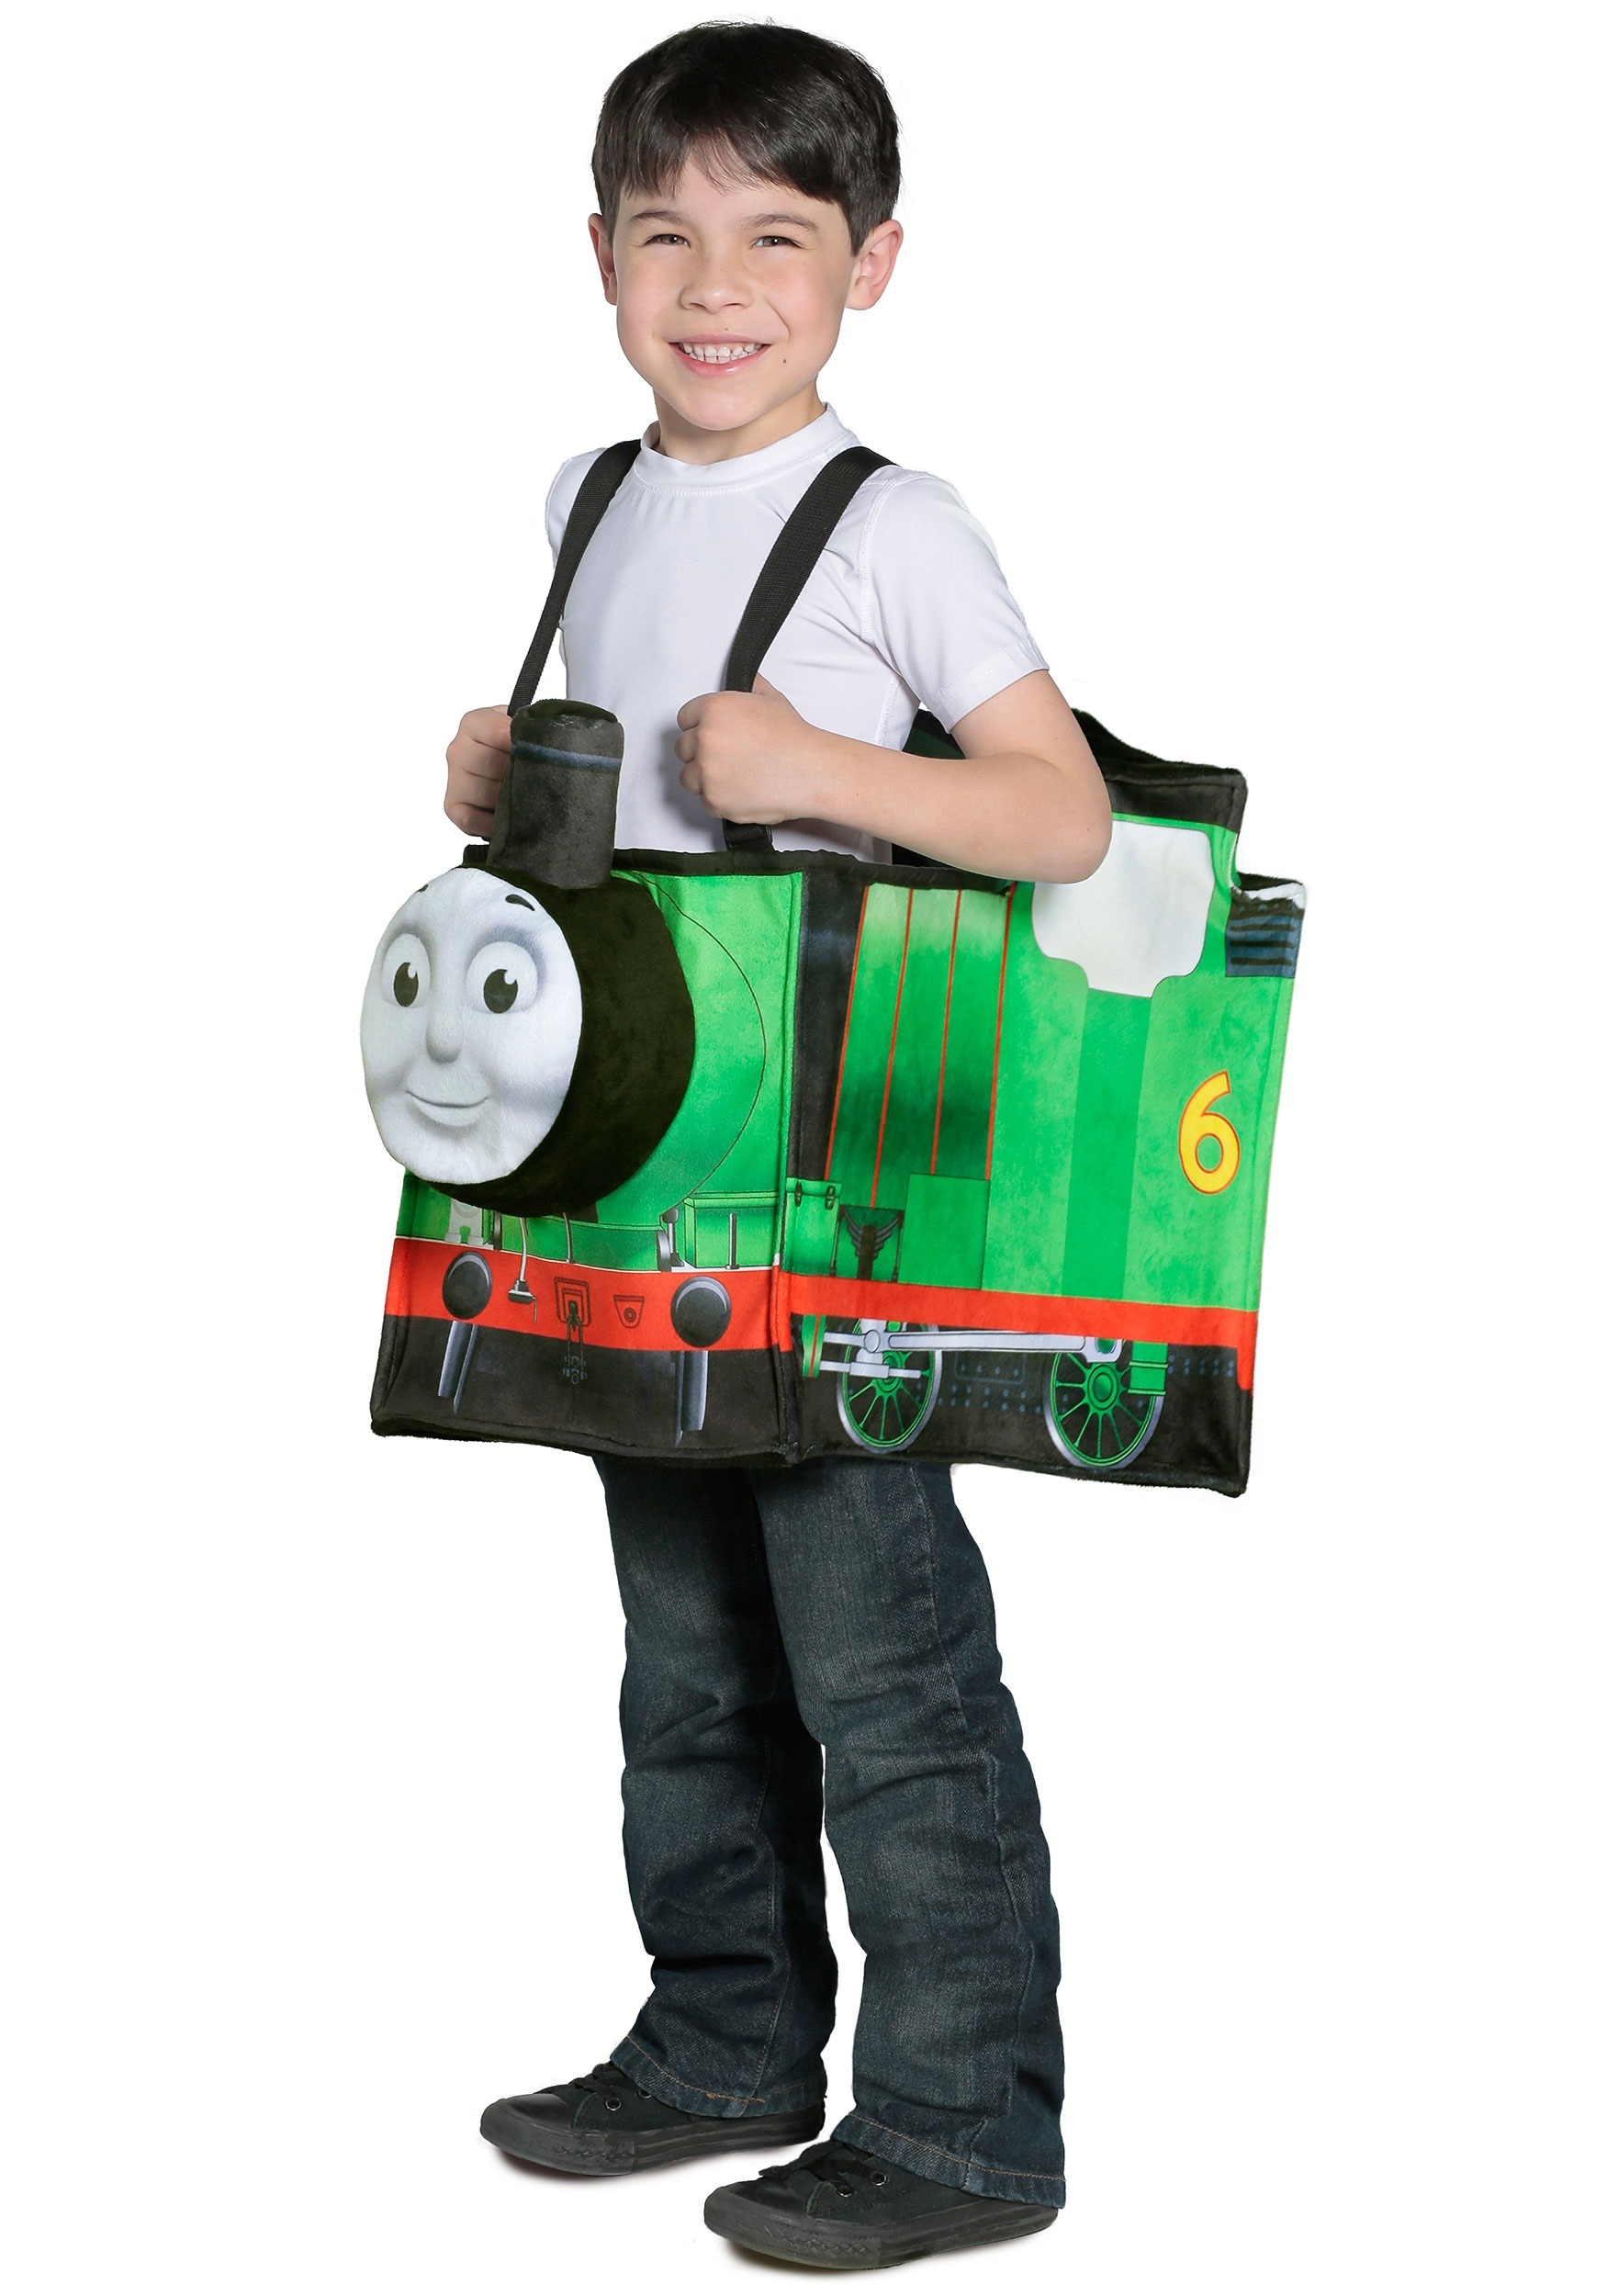 BOYS TODDLERS THOMAS THE TANK ENGINE COSTUME SIZE 3T RU610084